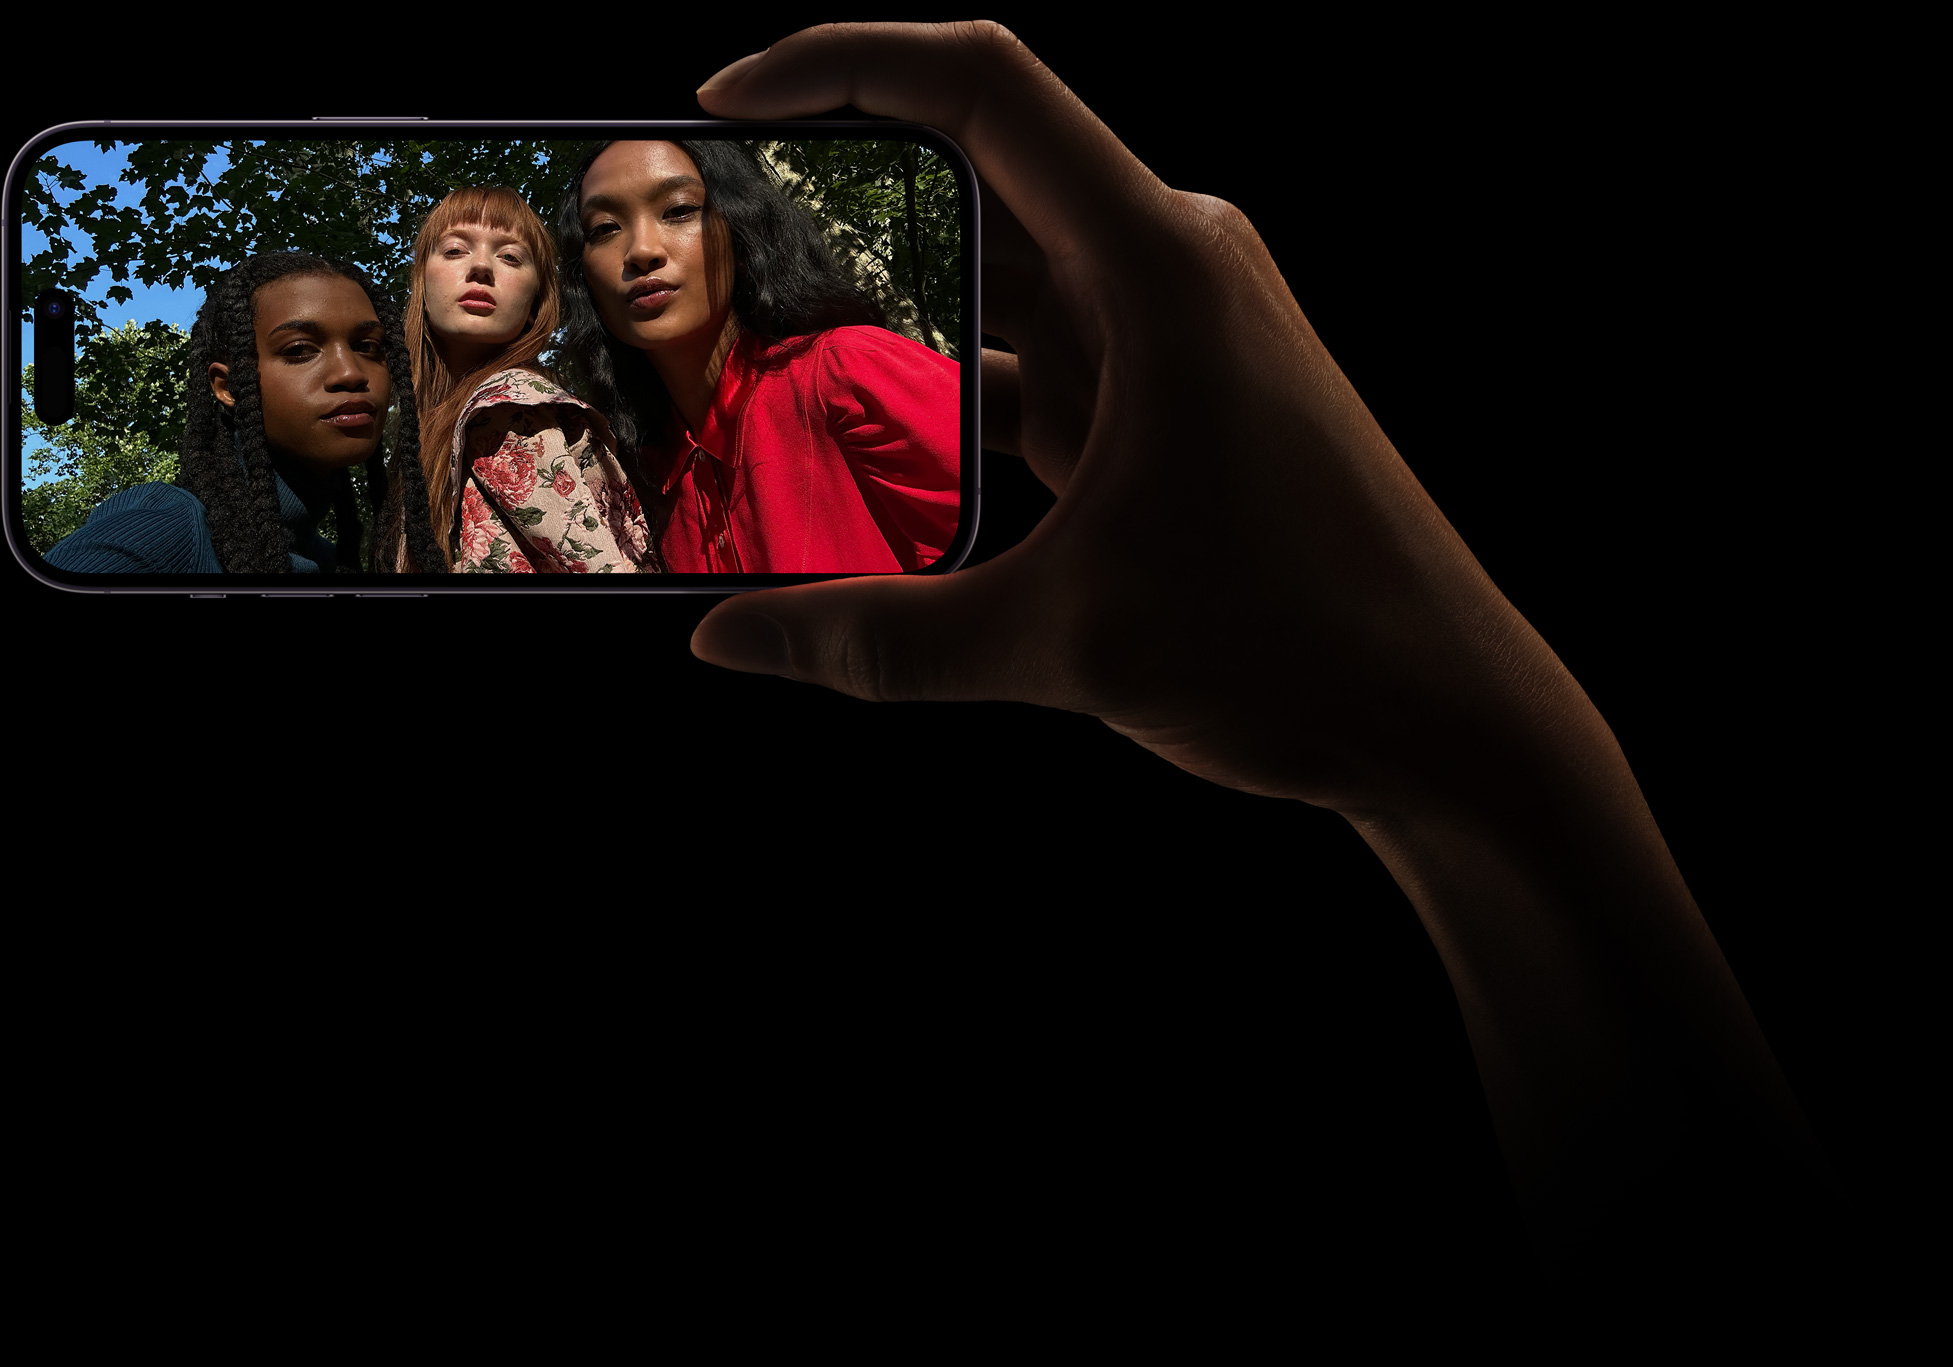 A group selfie of three women posing together. The photo was taken with the TrueDepth camera.